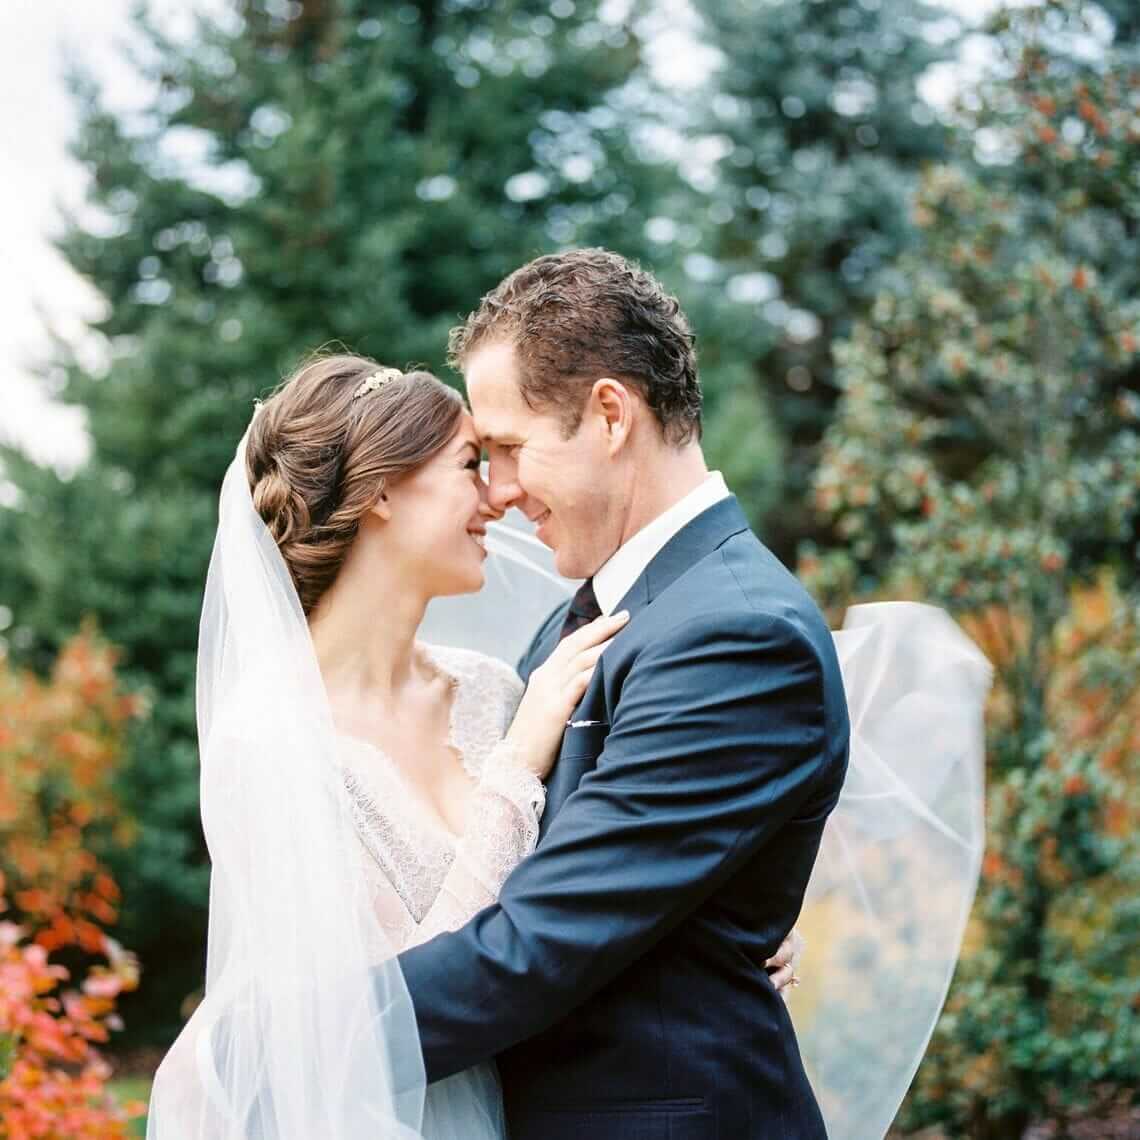 A bride and groom embrace in front of an autumn tree.